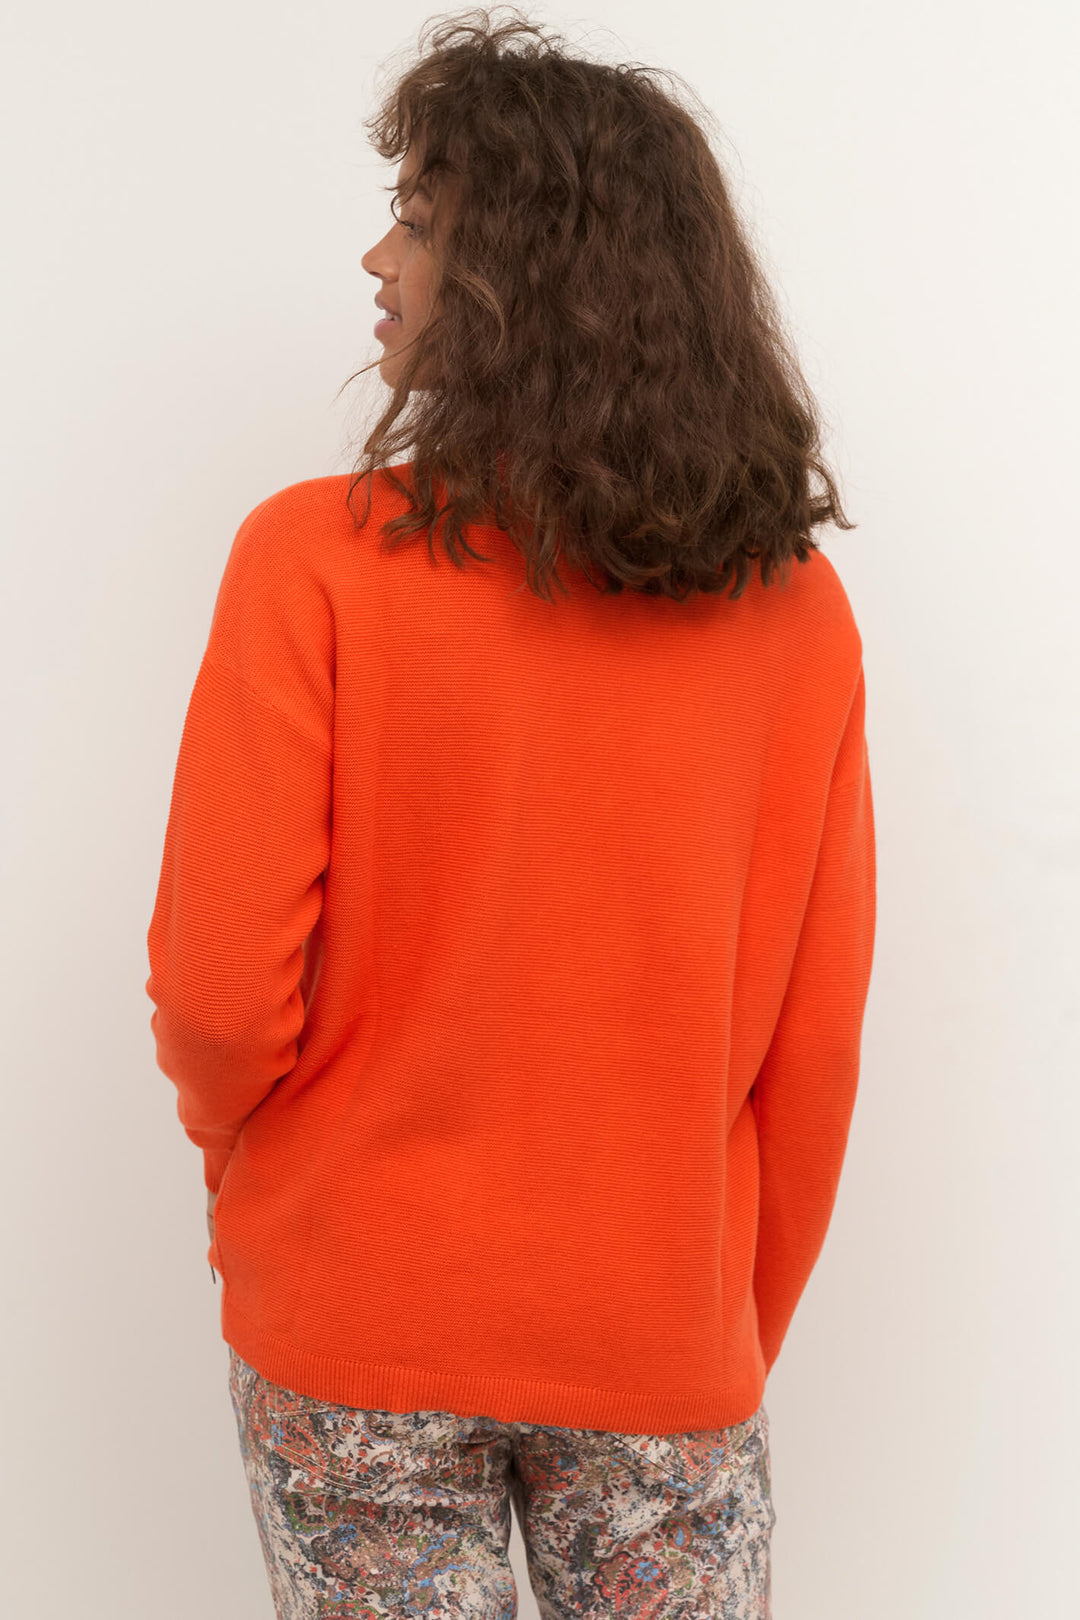 Cream Clothing CRSillar Tigerlily Orange Knitted Jumper - Experience Boutique